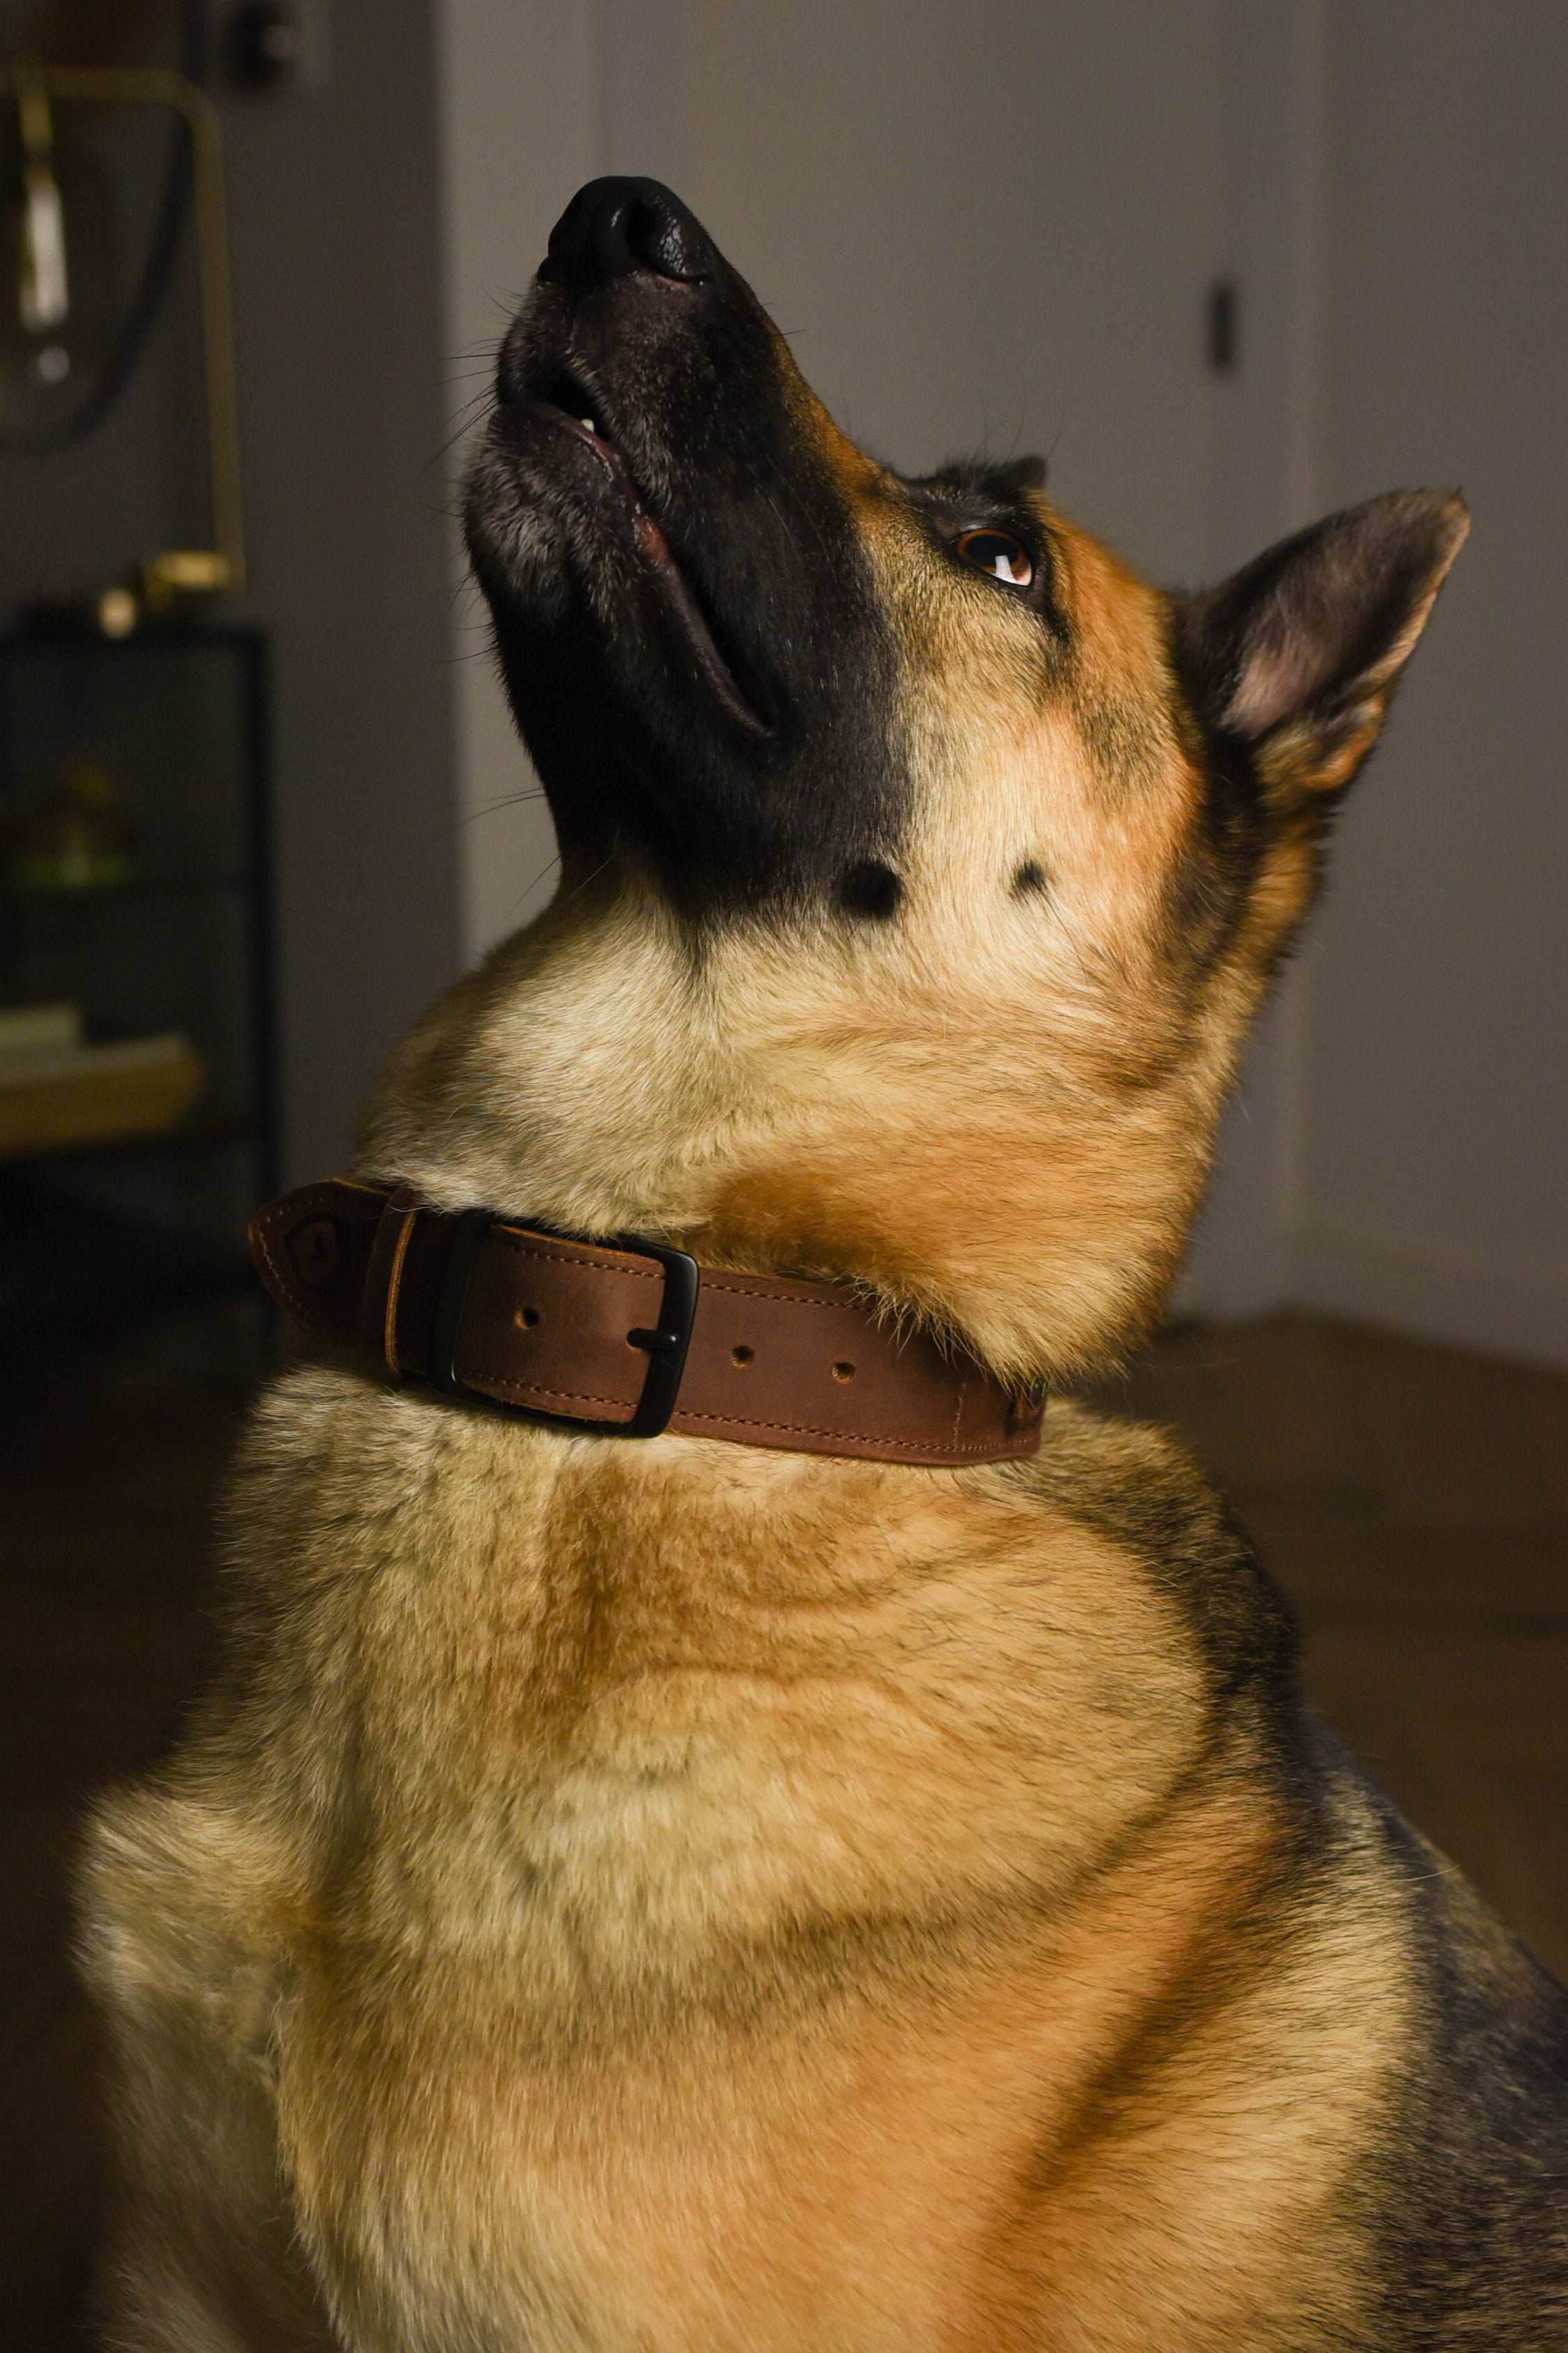 Dog Looking Up Showing His Trayvax Beast Dog Collar Off For Friends